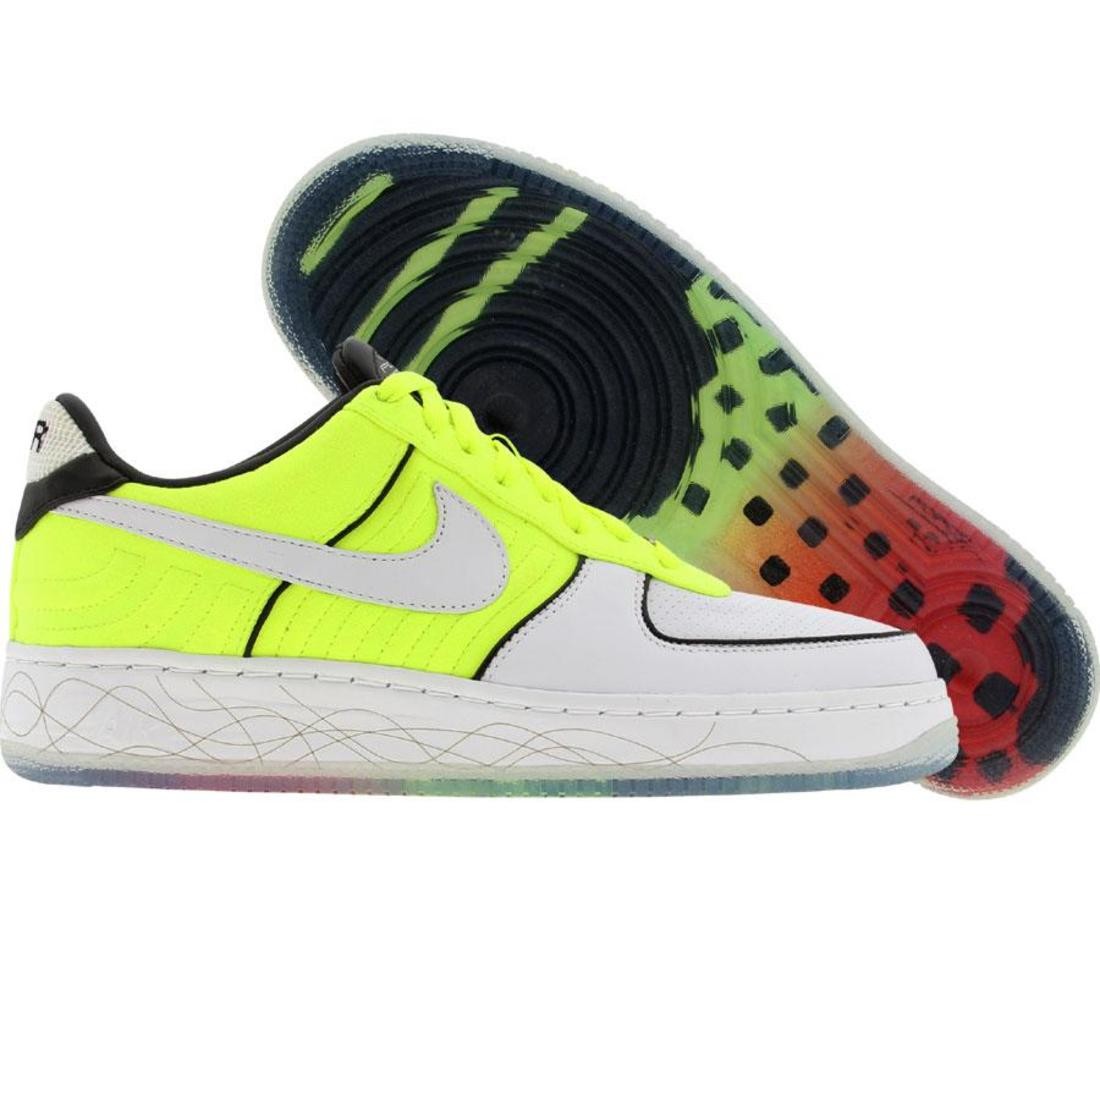 Nike Air Force 1 07 Low Supreme Inside Out - Talaria Edition (white / neon yellow / black)